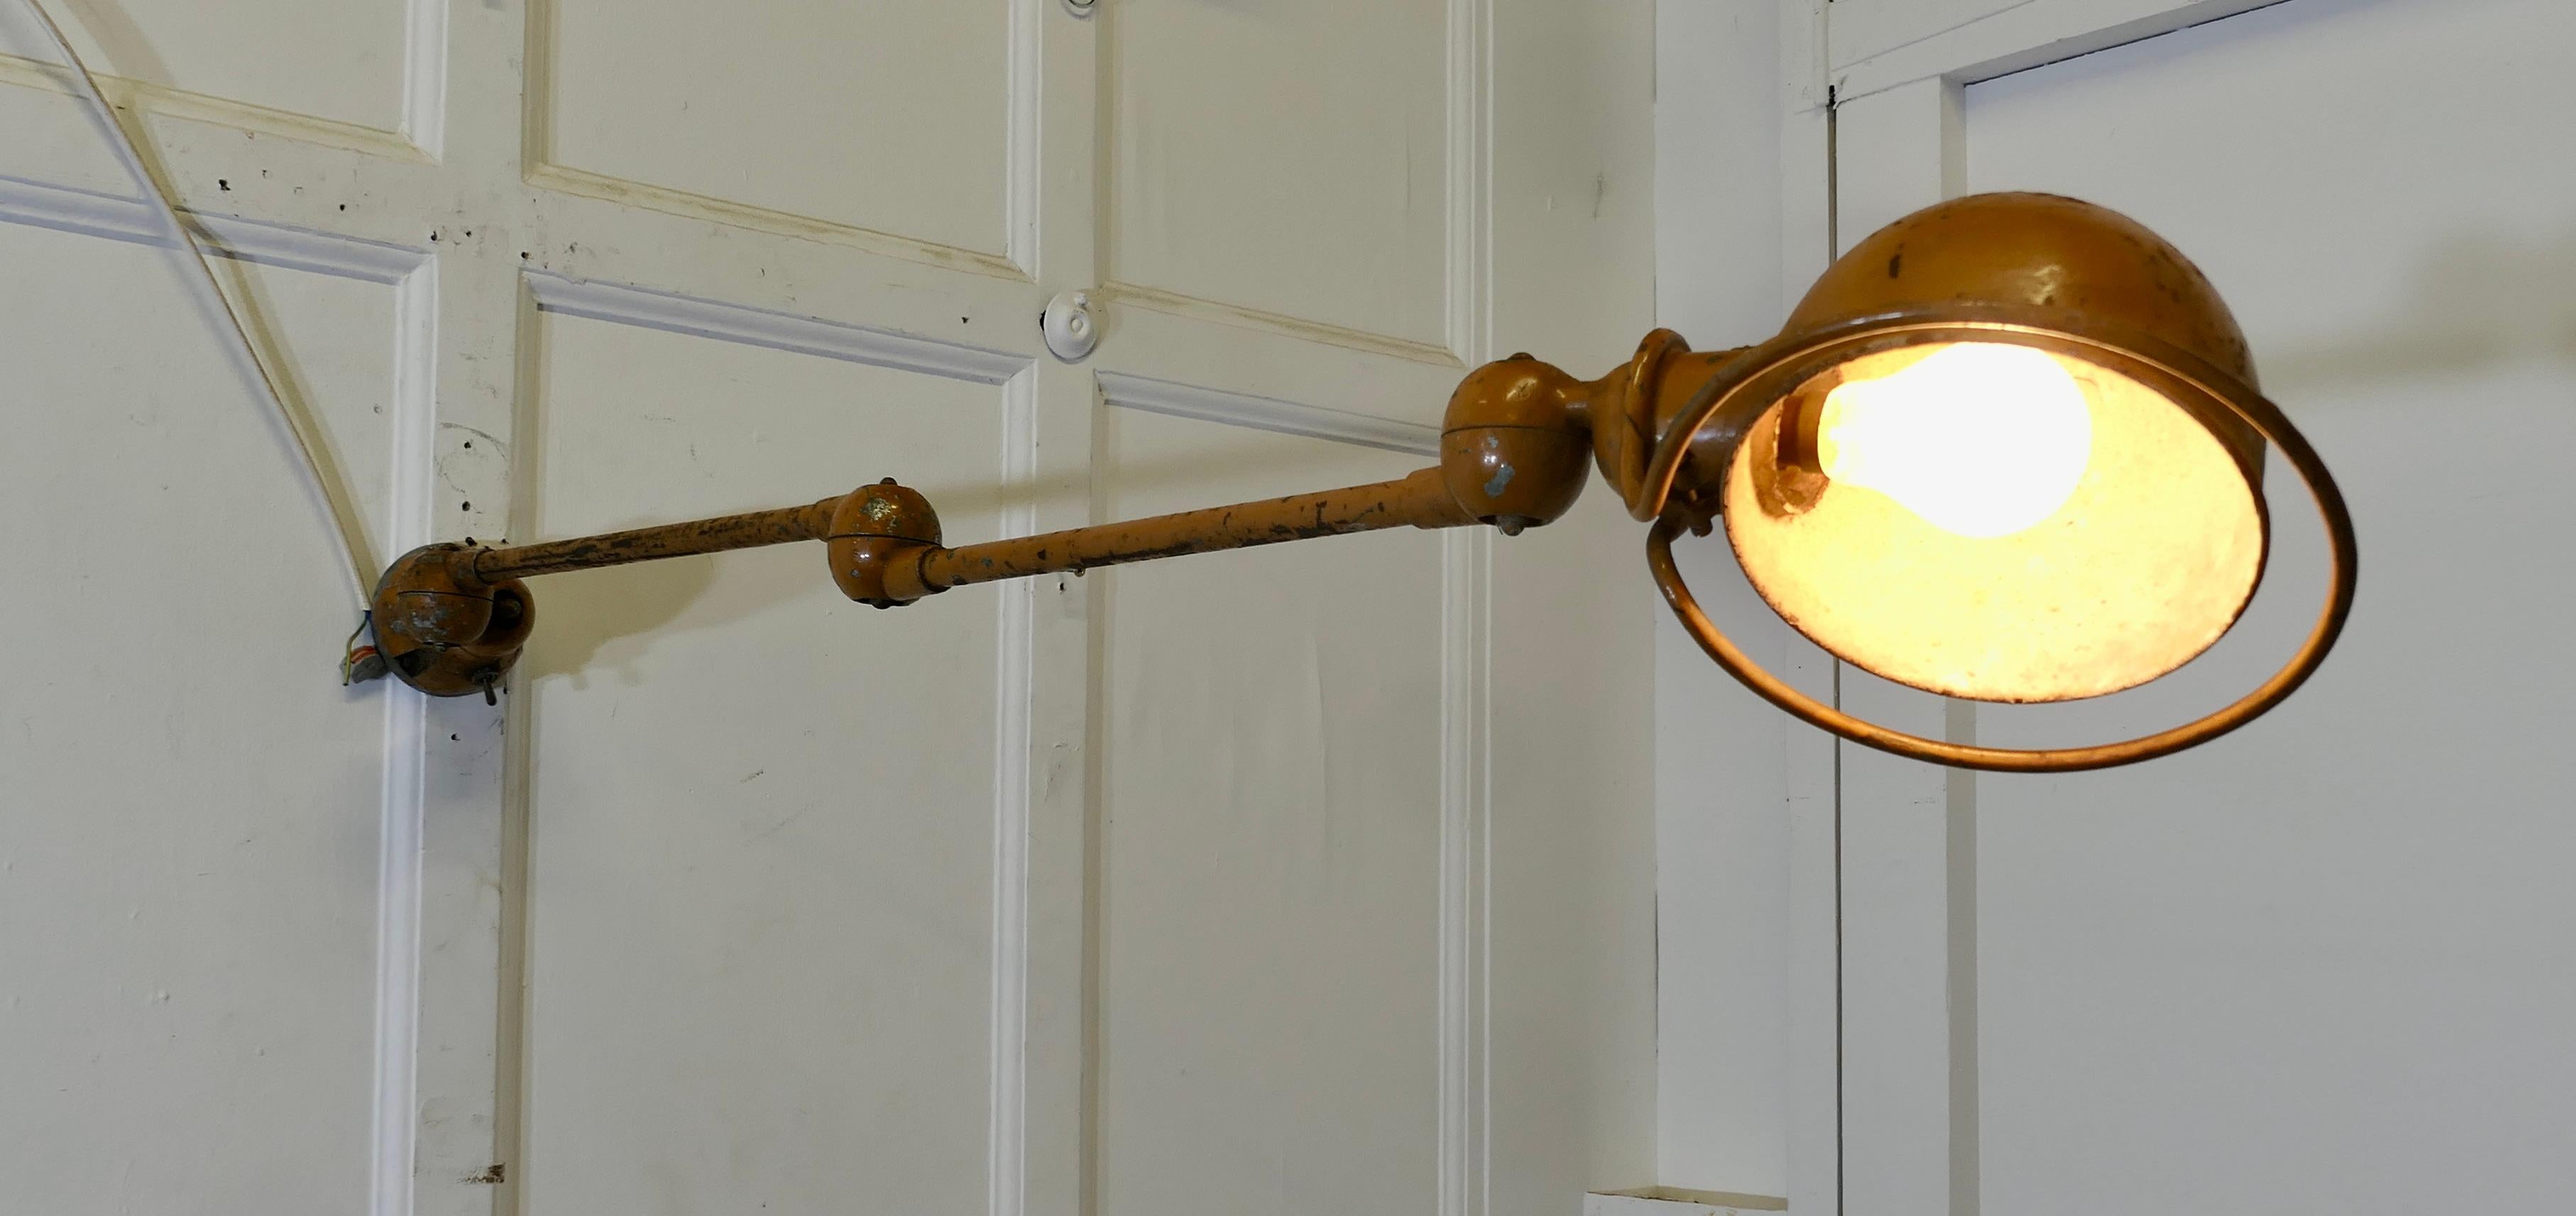 Mid-20th Century French Vintage Industrial Jielde Articulated Wall Light Sconce  This is a very u